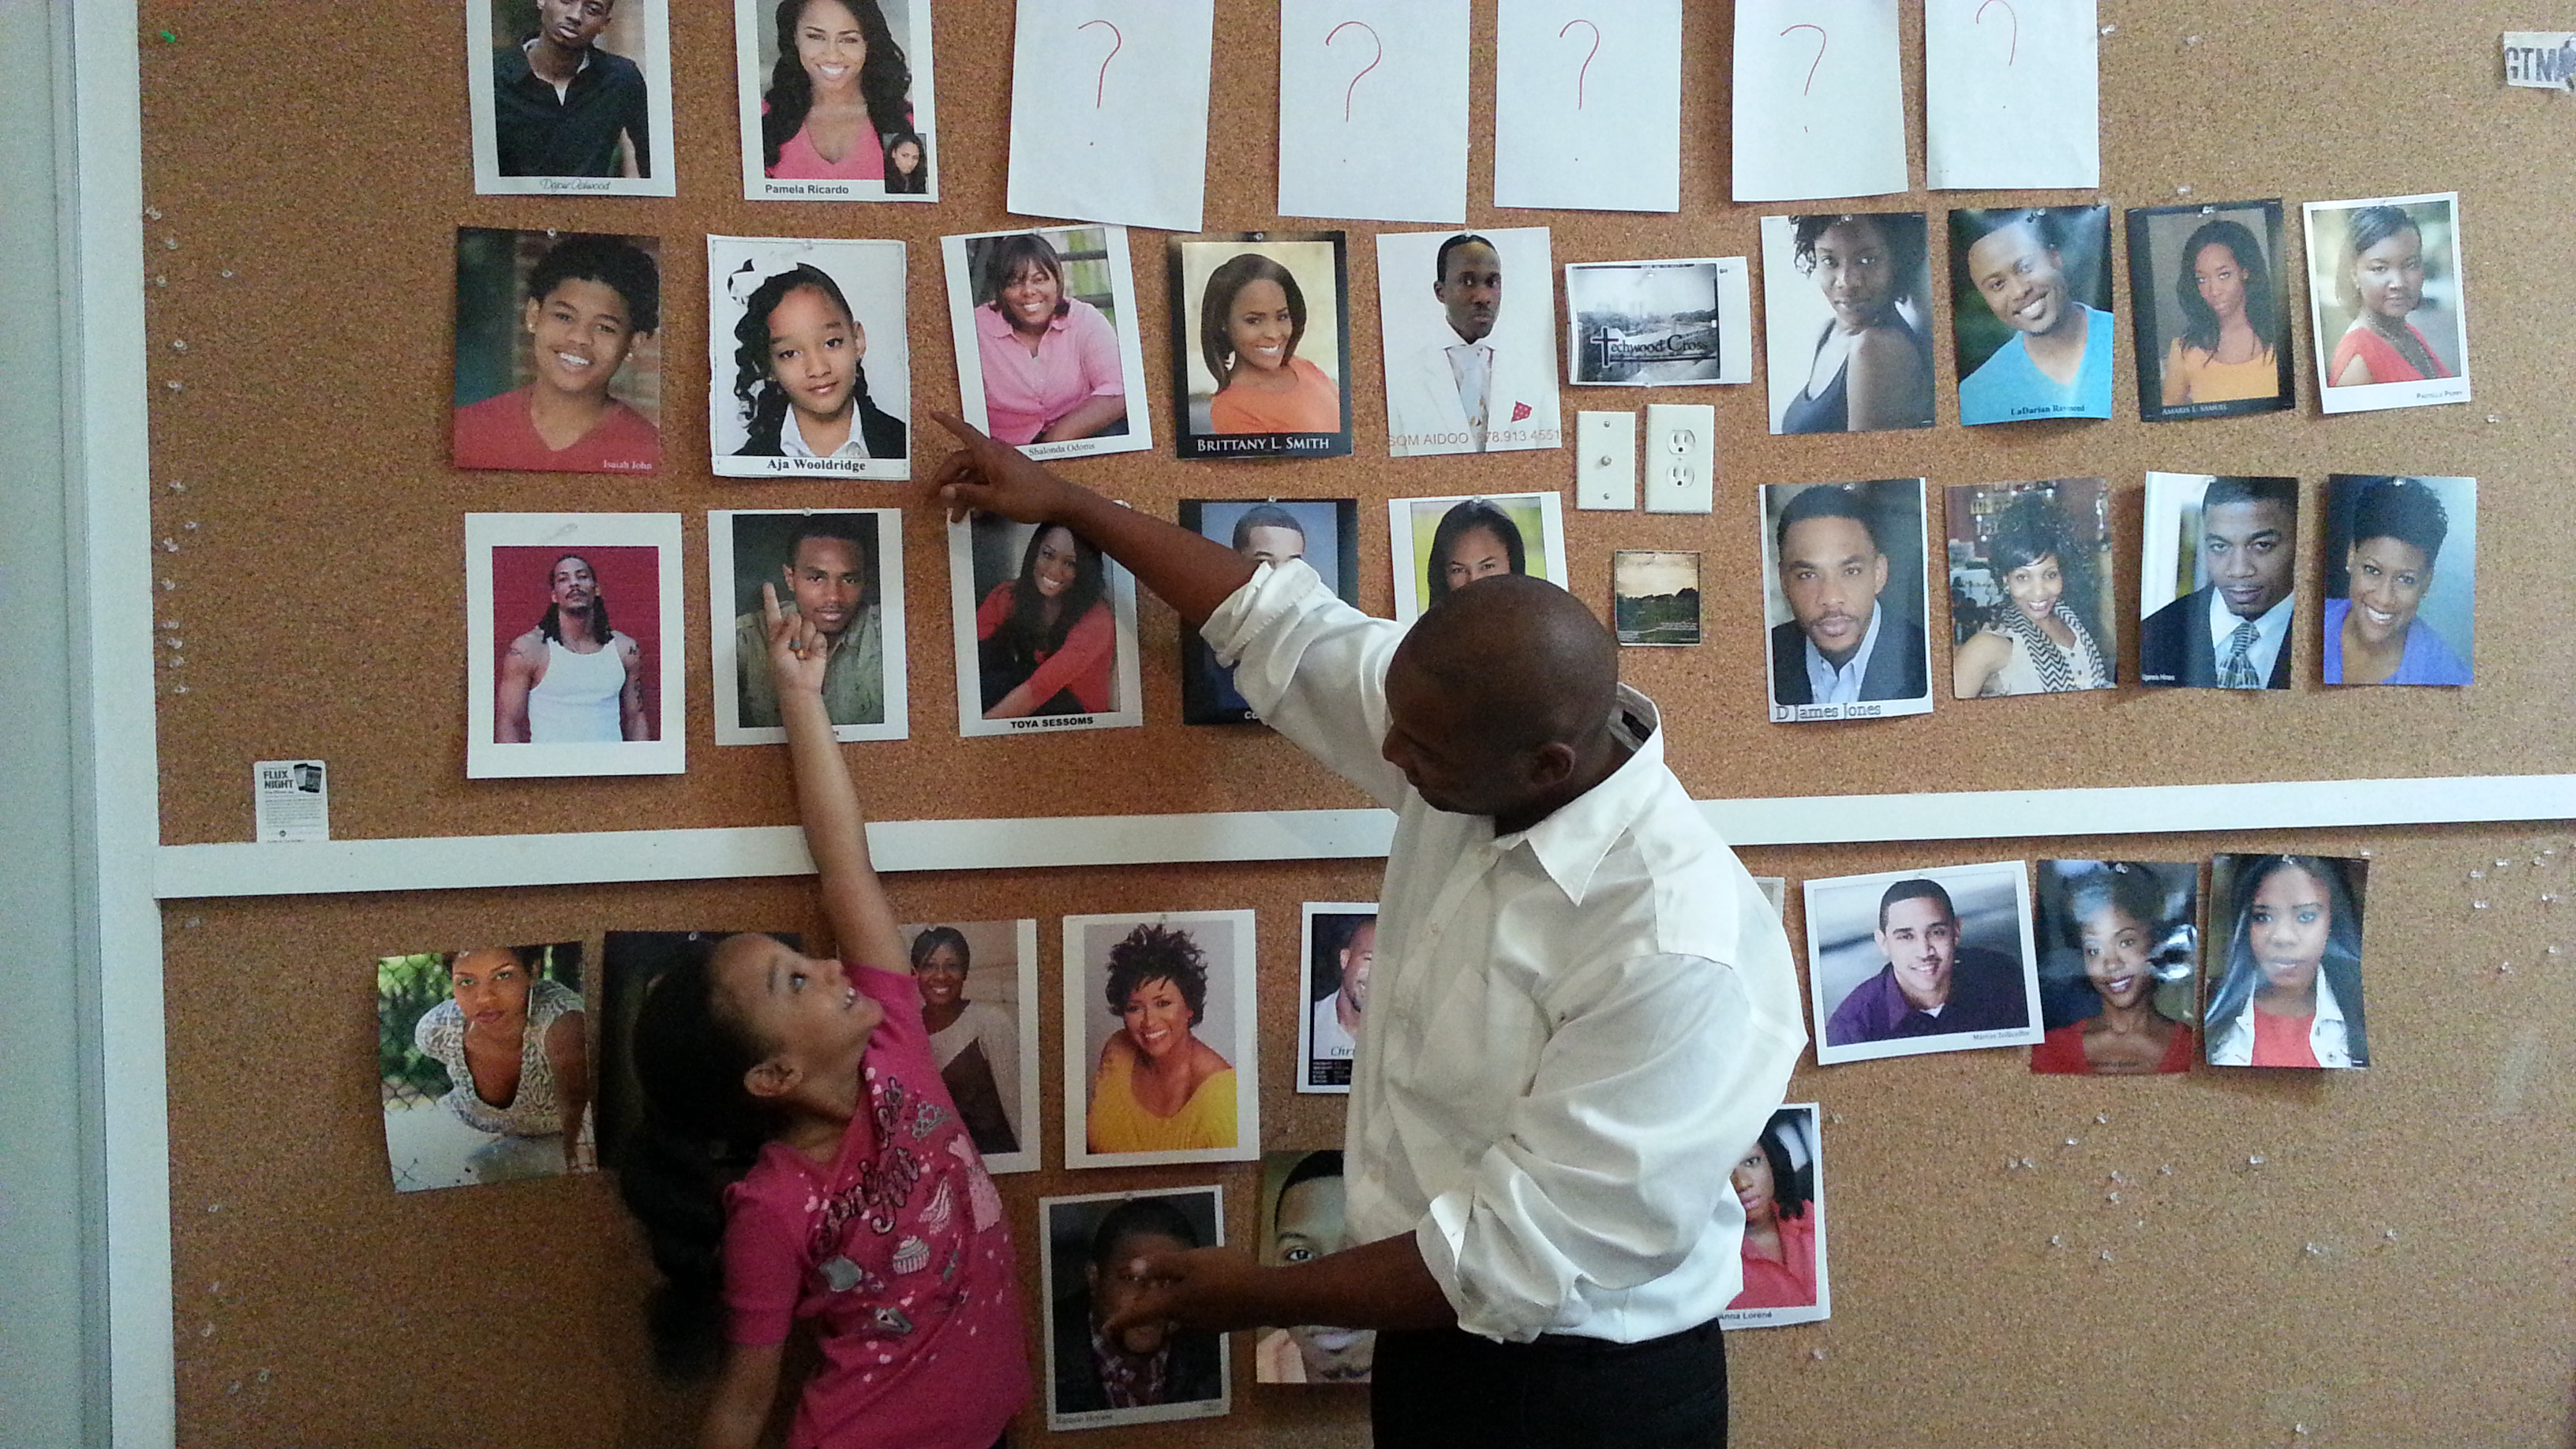 Aja and super director Anthony Apar Anderson at the production office for the TV series TechWood Cross